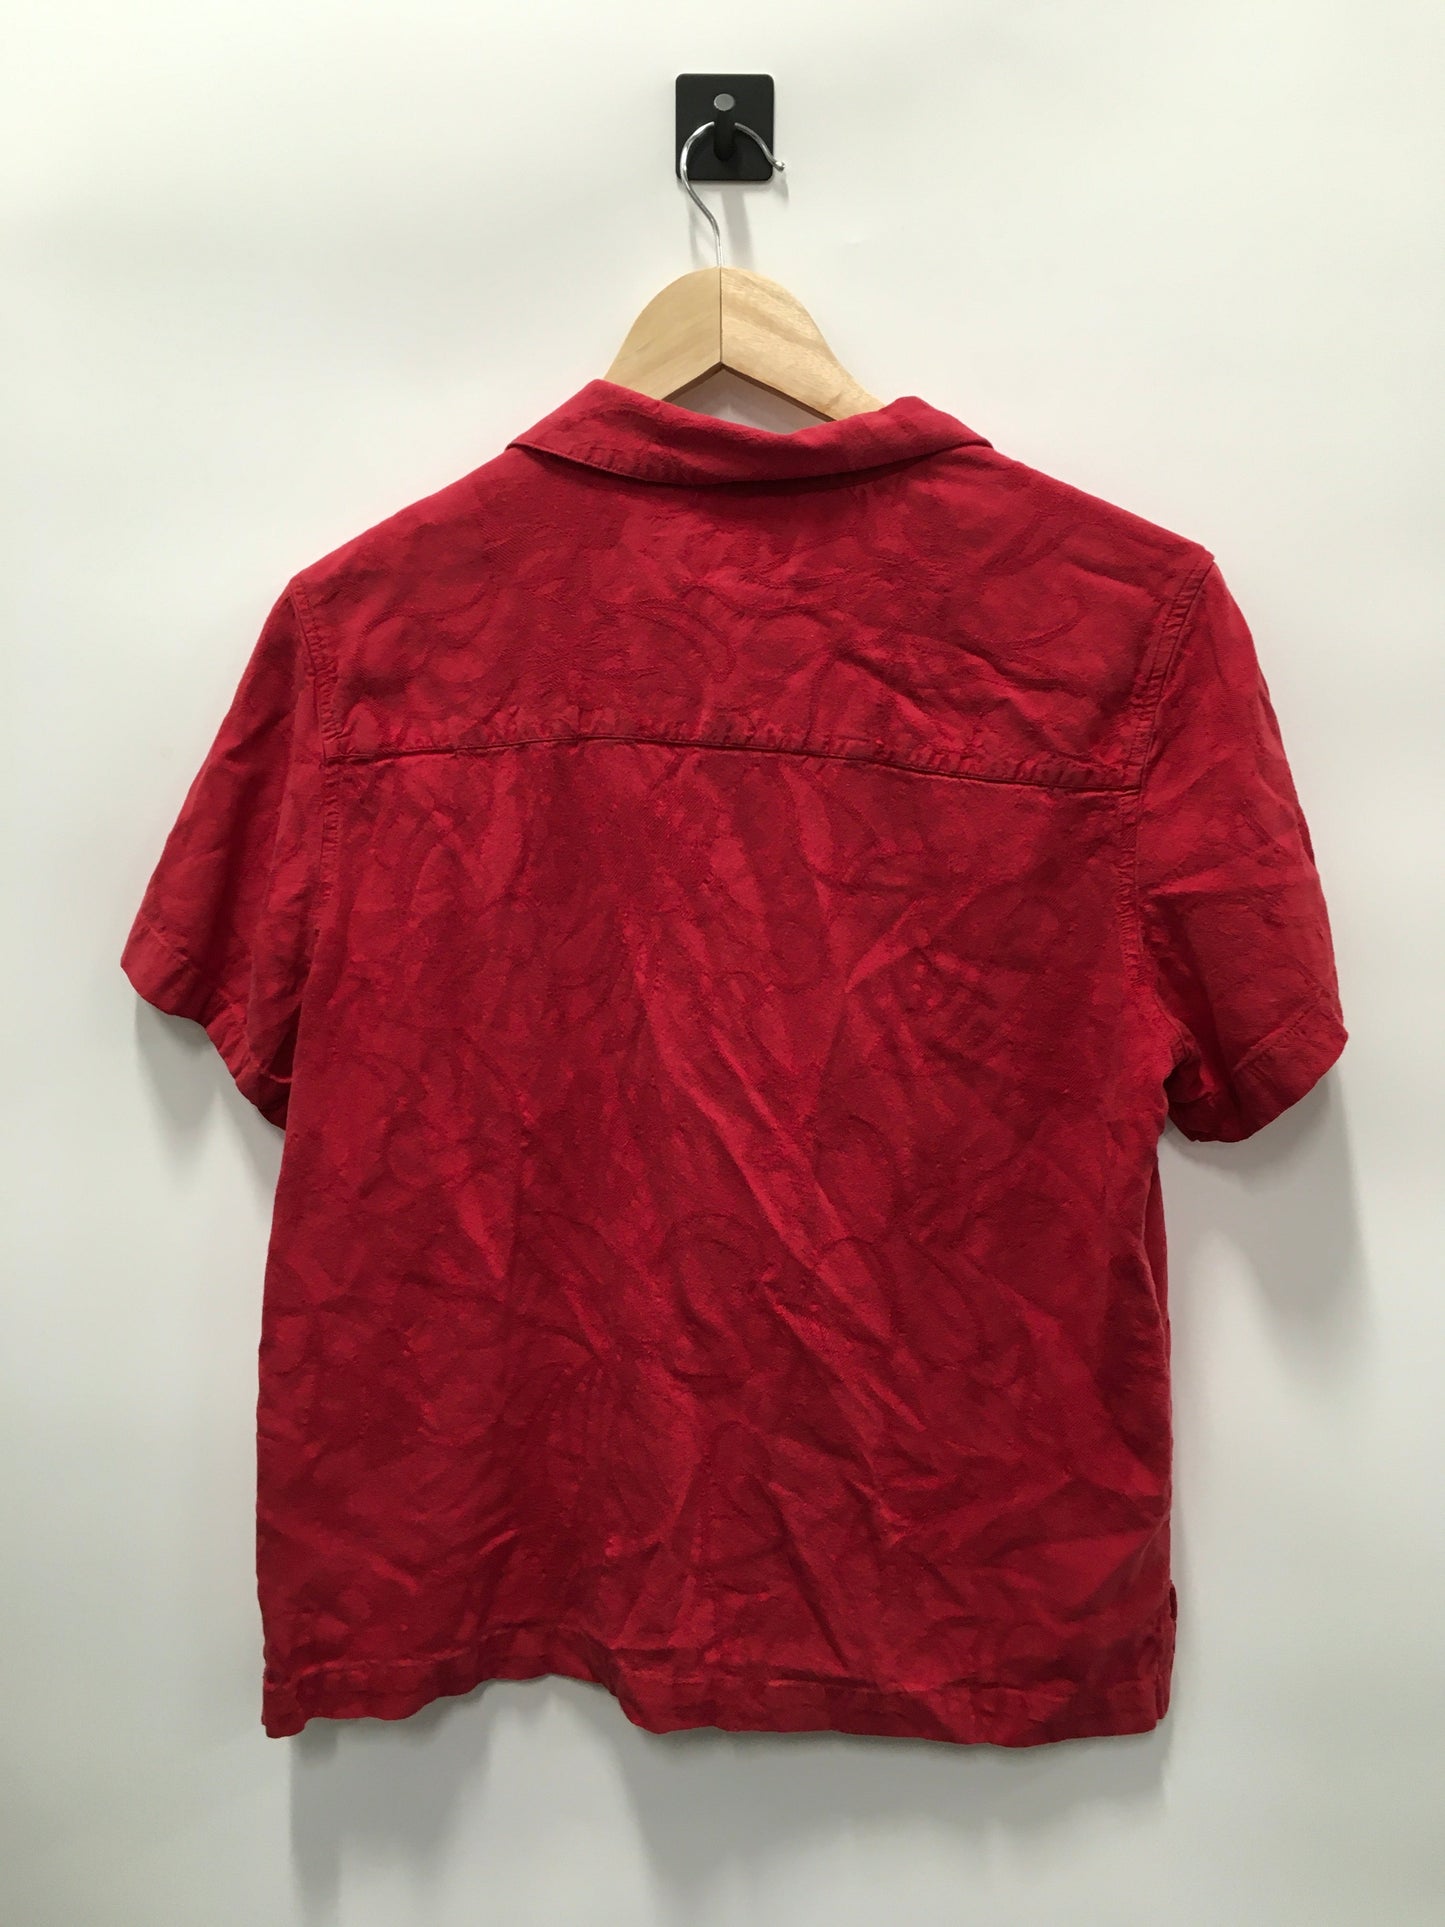 Red Top Short Sleeve Jamaica Bay, Size L